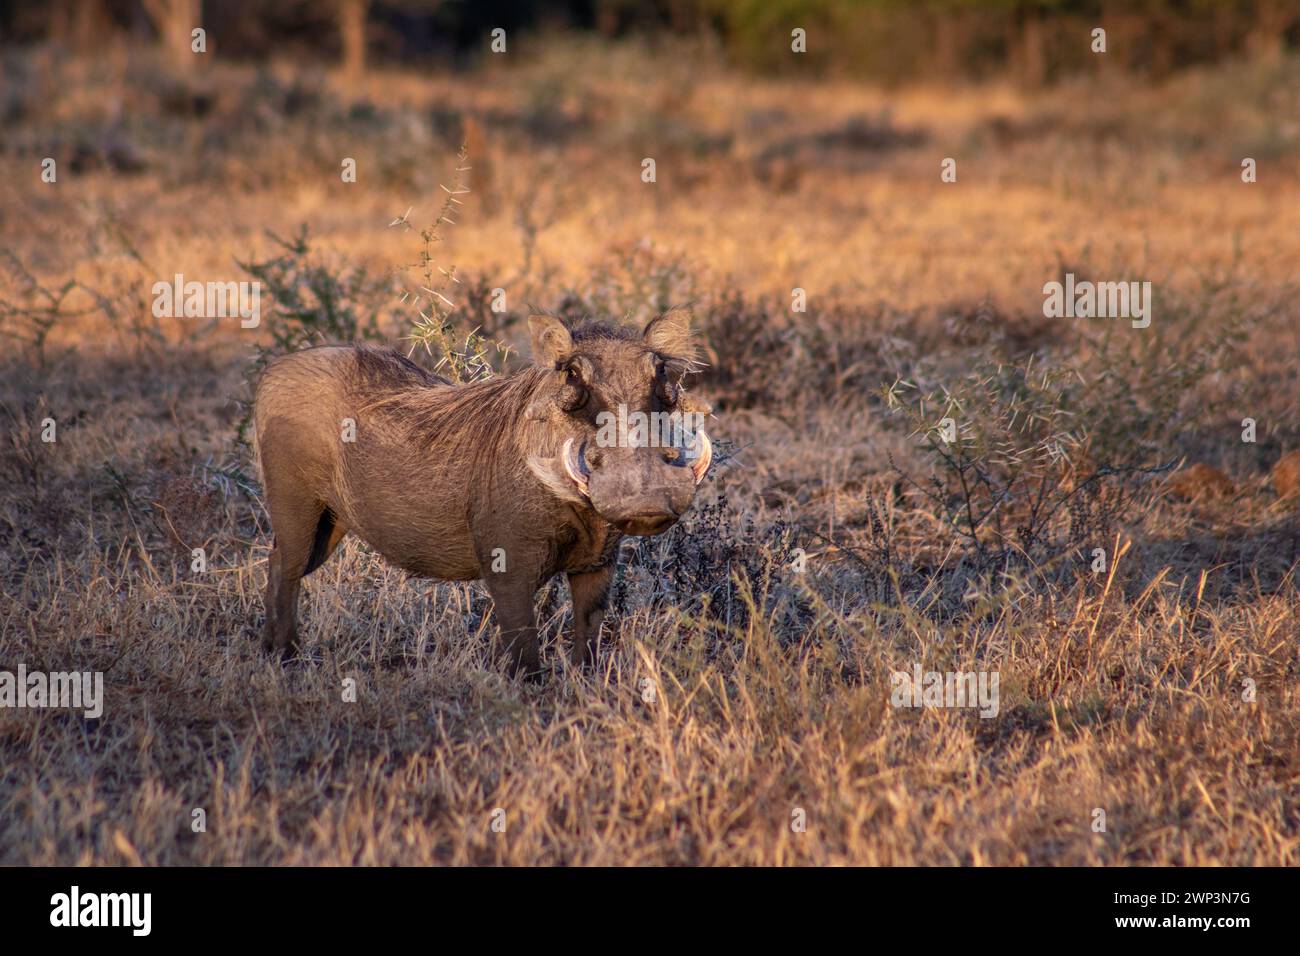 Common warthog (Phacochoerus africanus) grazing on beautiful green grass, Kruger National Park, South Africa Stock Photo